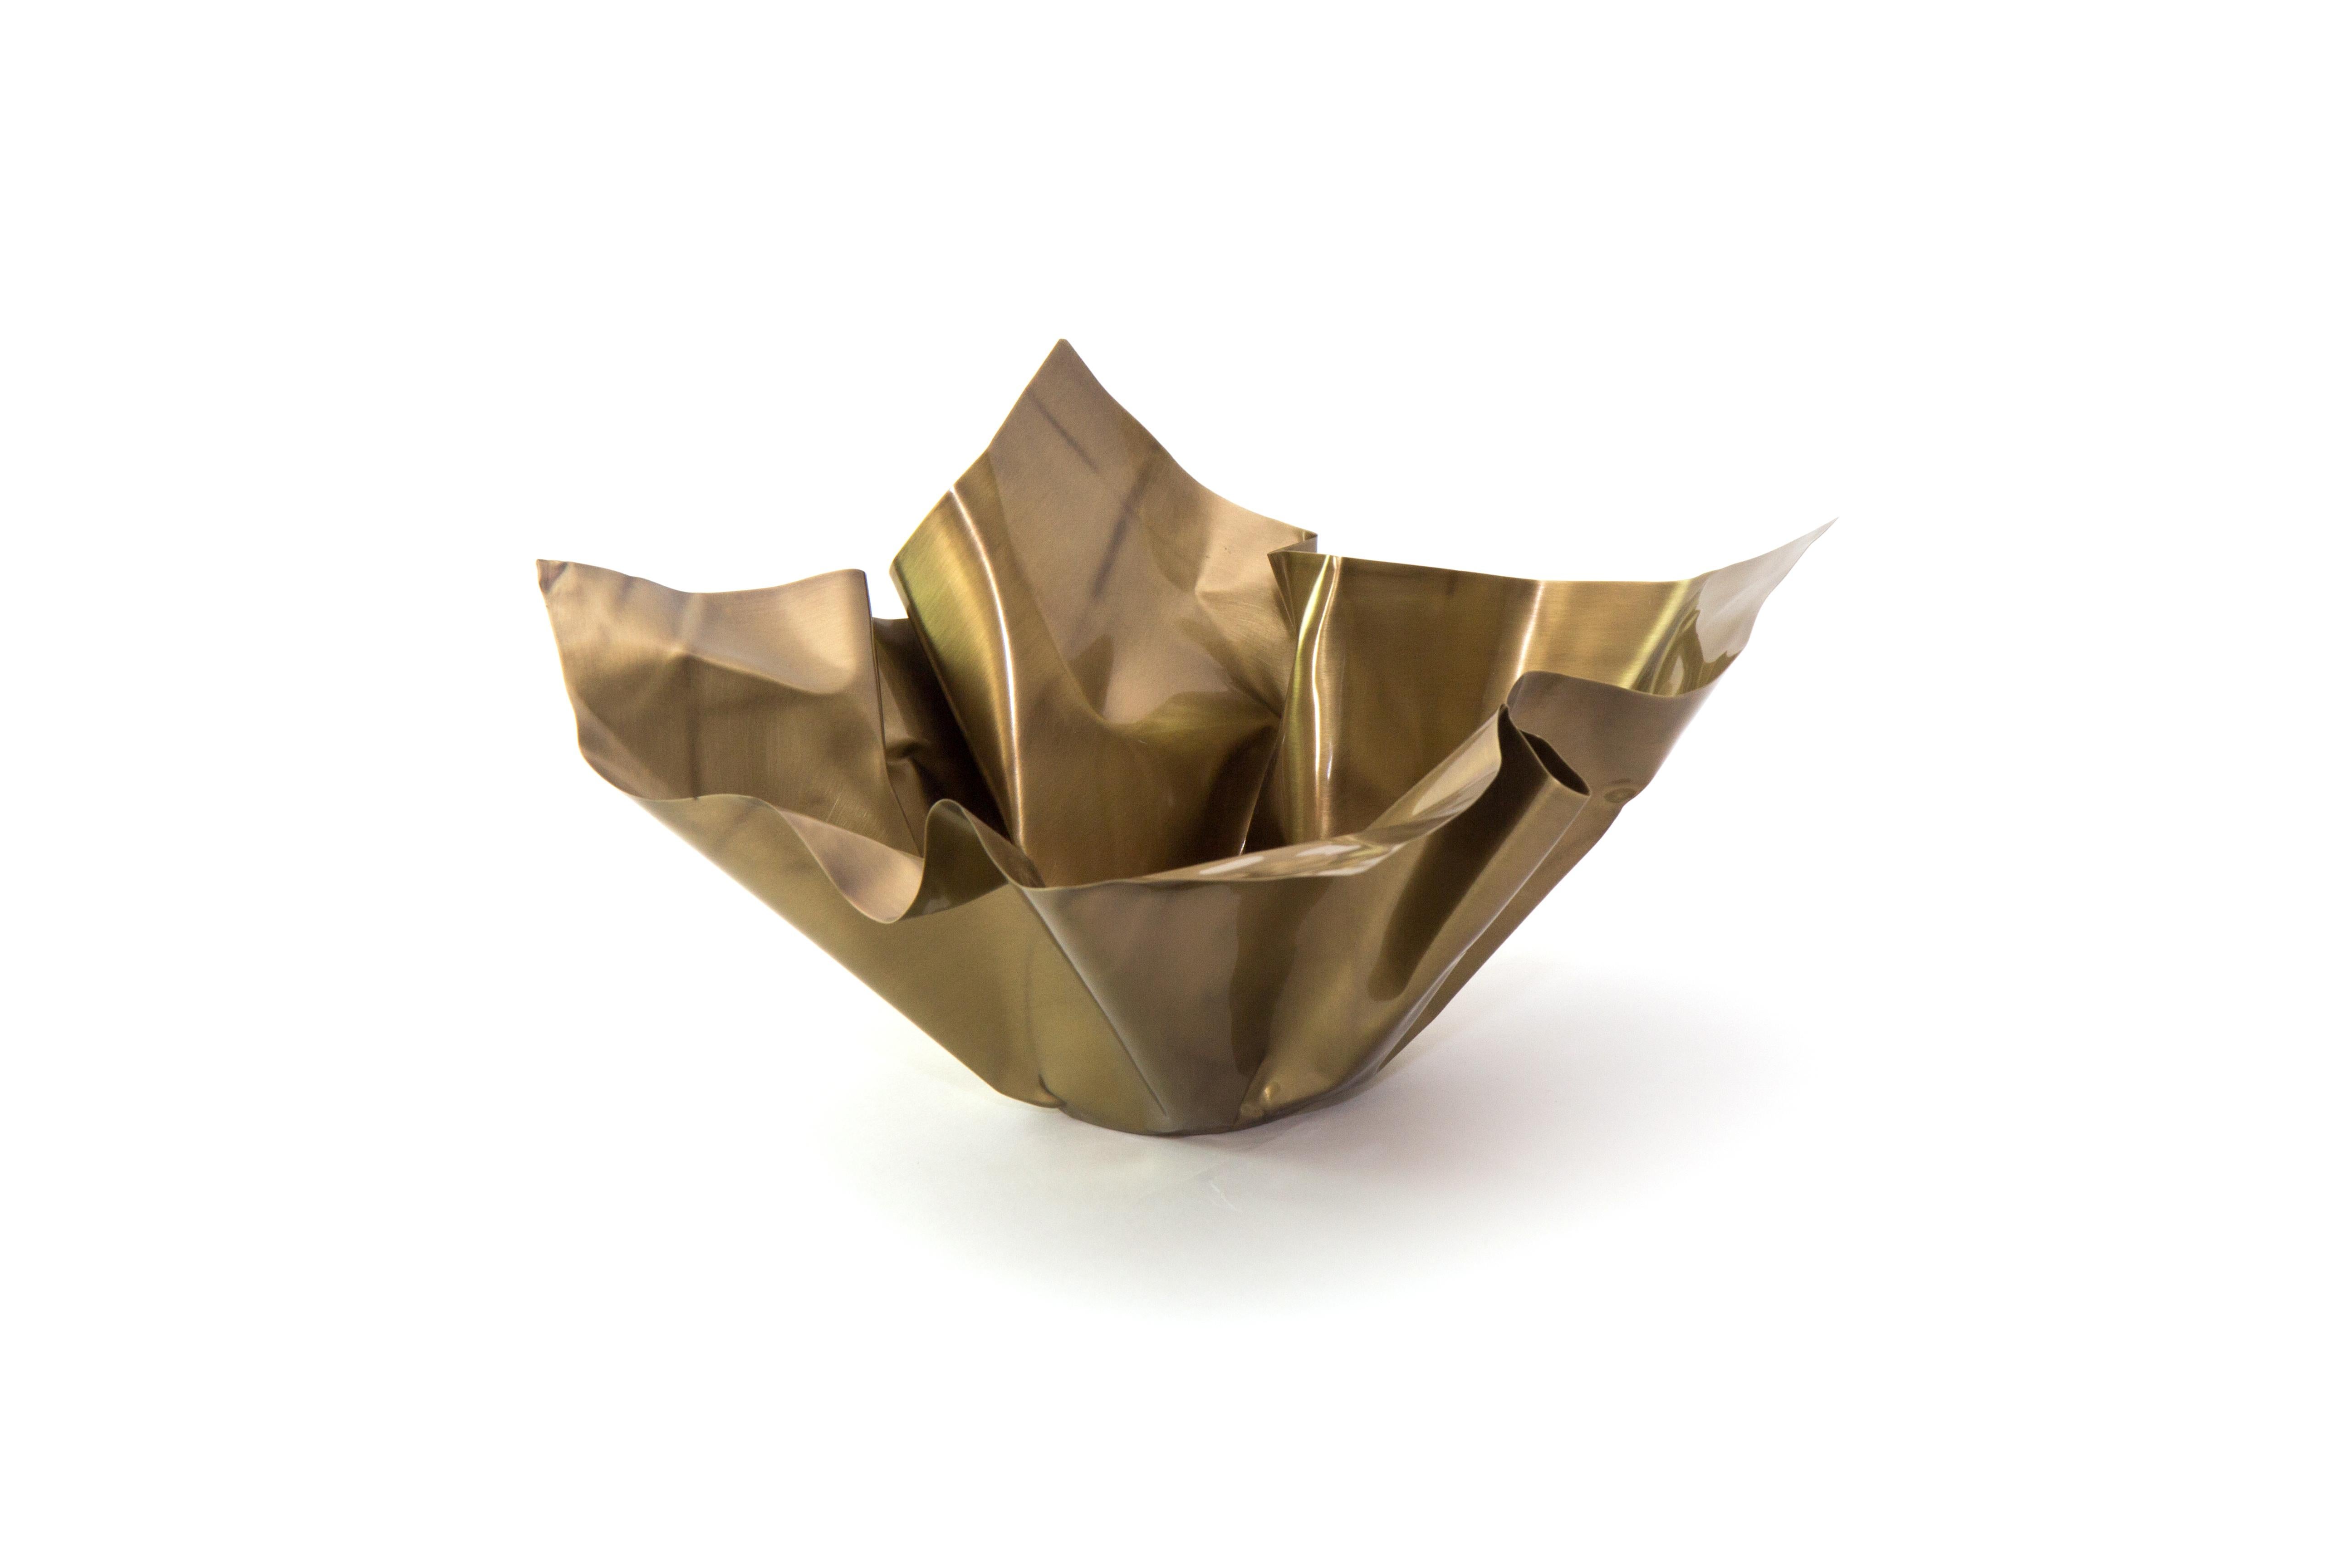 Paper brass bowl I by Gentner Design
Dimensions: D 25.4 x W 25.4 x H 12.7 cm
Materials: tarnished brass
Available in tarnished brass and darkened brass.

The Paper Series embodies the idea of crumpling paper set in time. The materiality of the